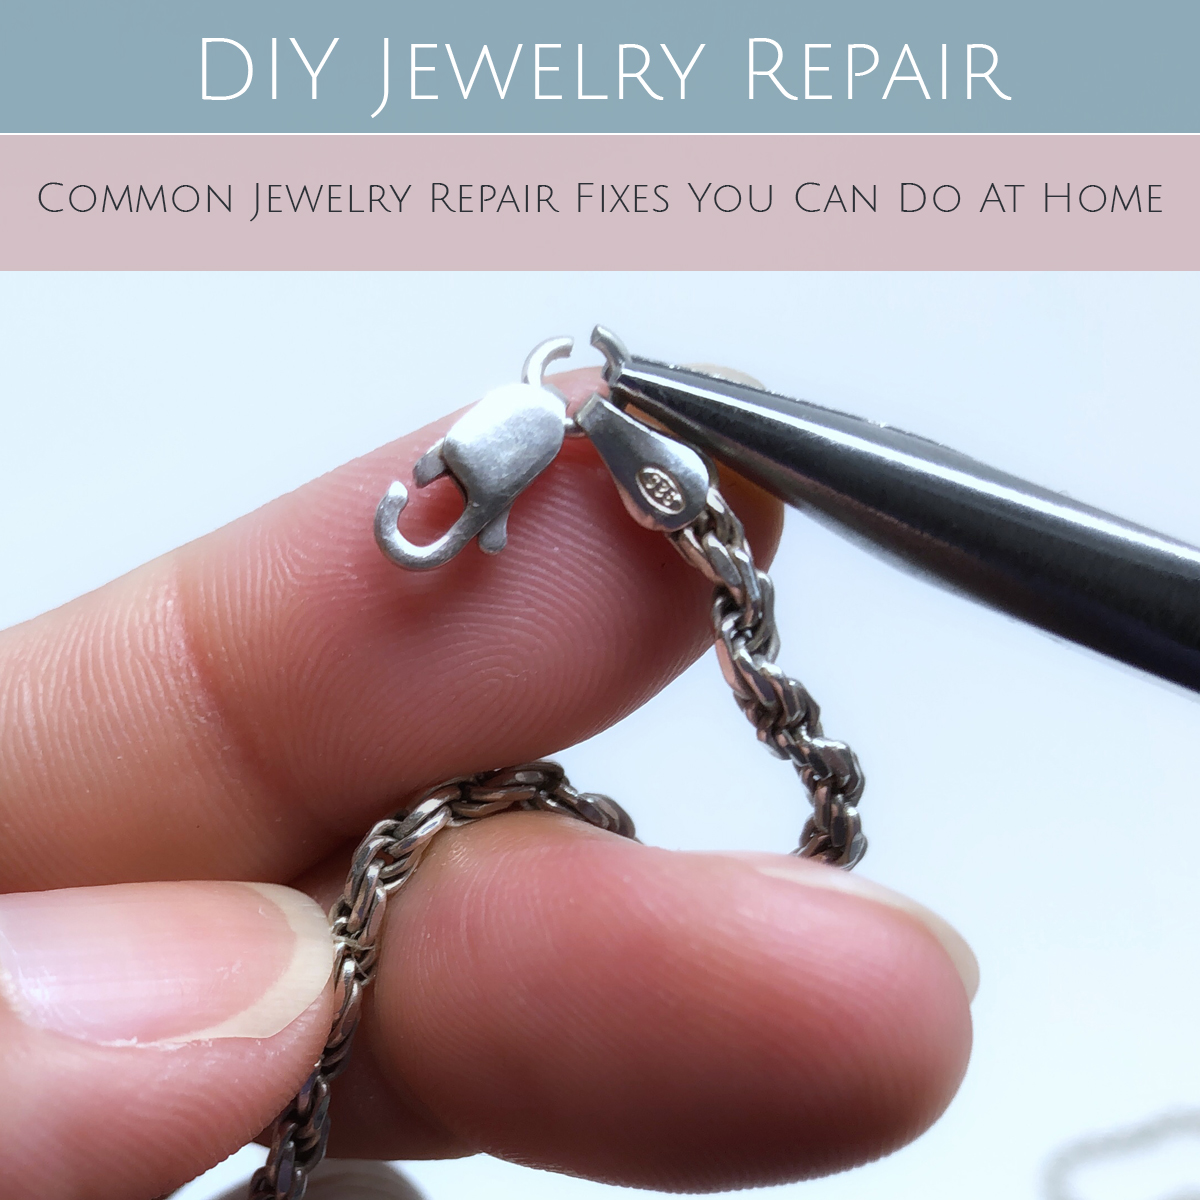 Diy Jewelry Repair Common Jewelry Repair Fixes You Can Do At Home